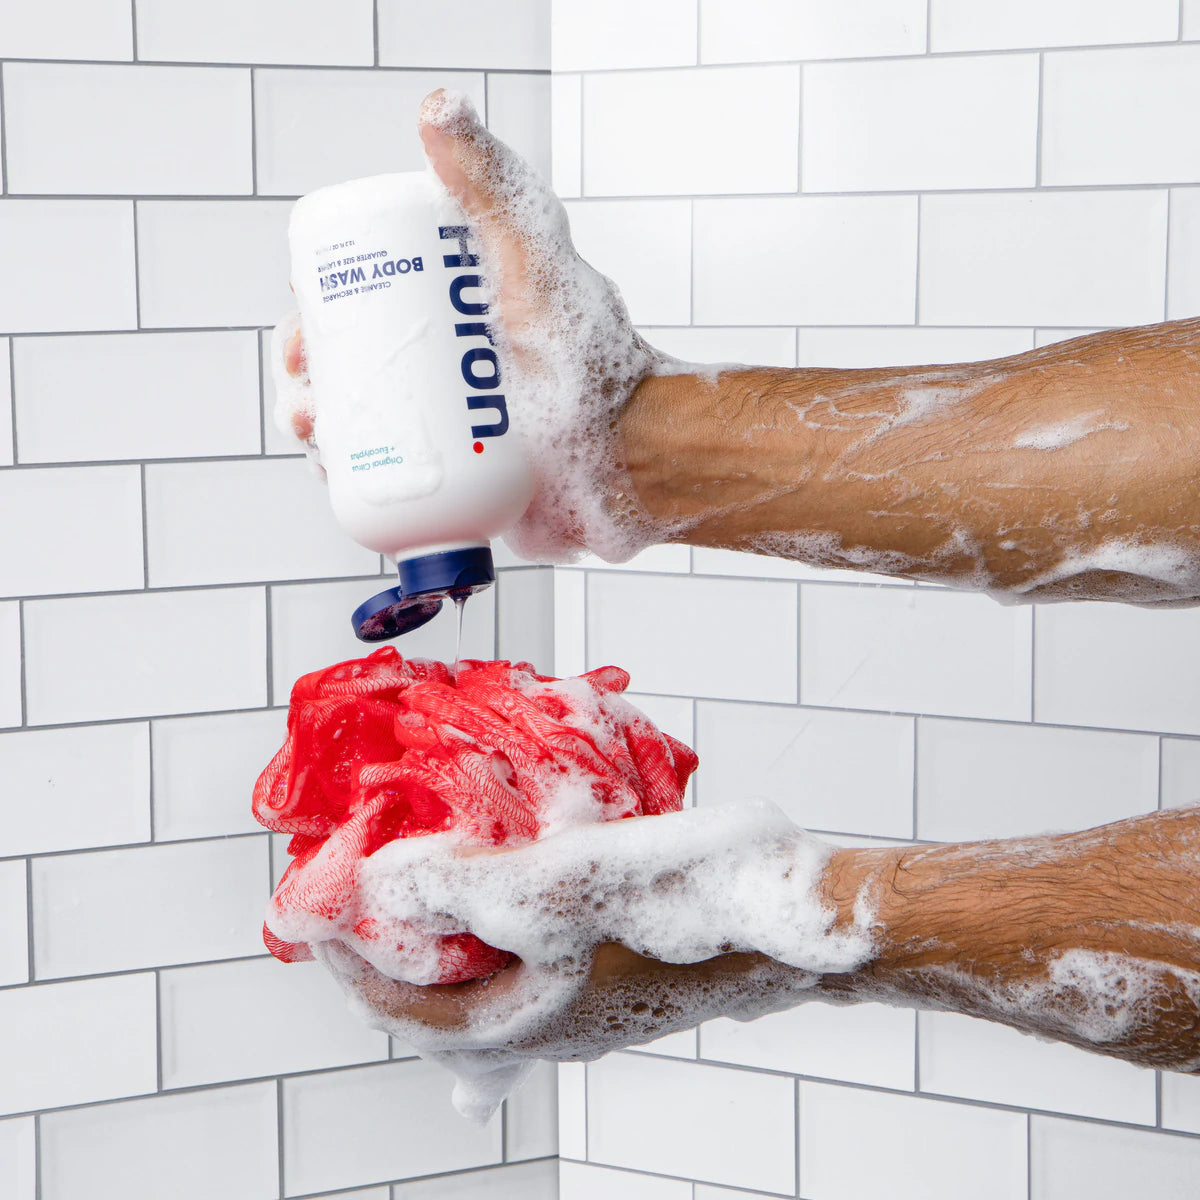 Body wash gets squeezed onto a shower loofah in a white tiled shower. 